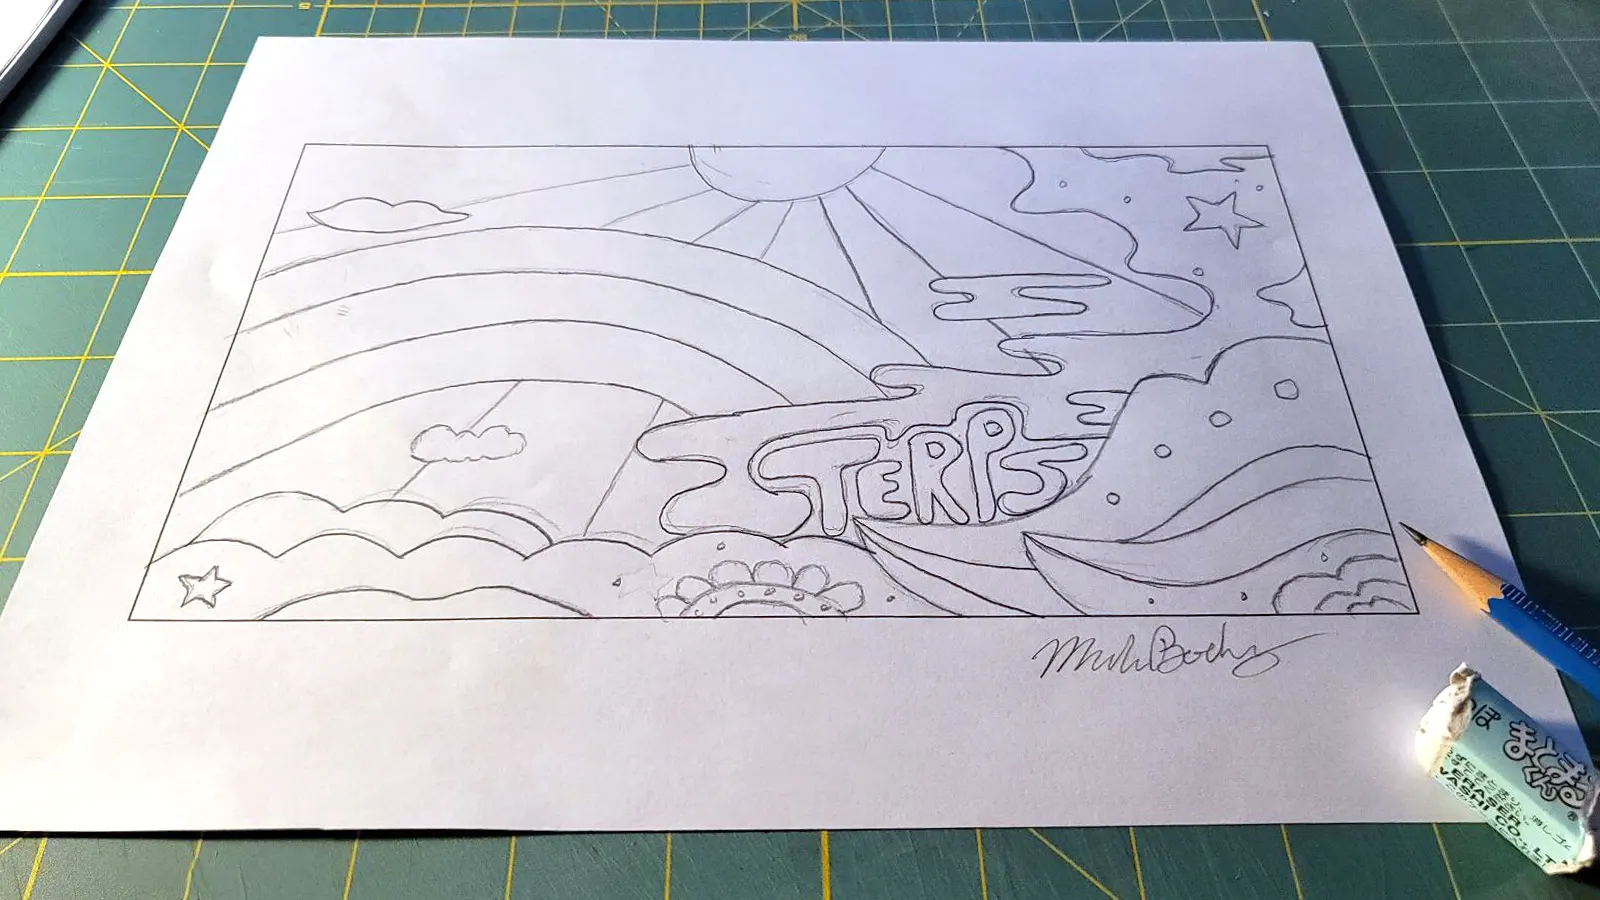 4/20 Background Sketch - True Terpenes - Illustrated by Mark Boehly - Graphicsbyte